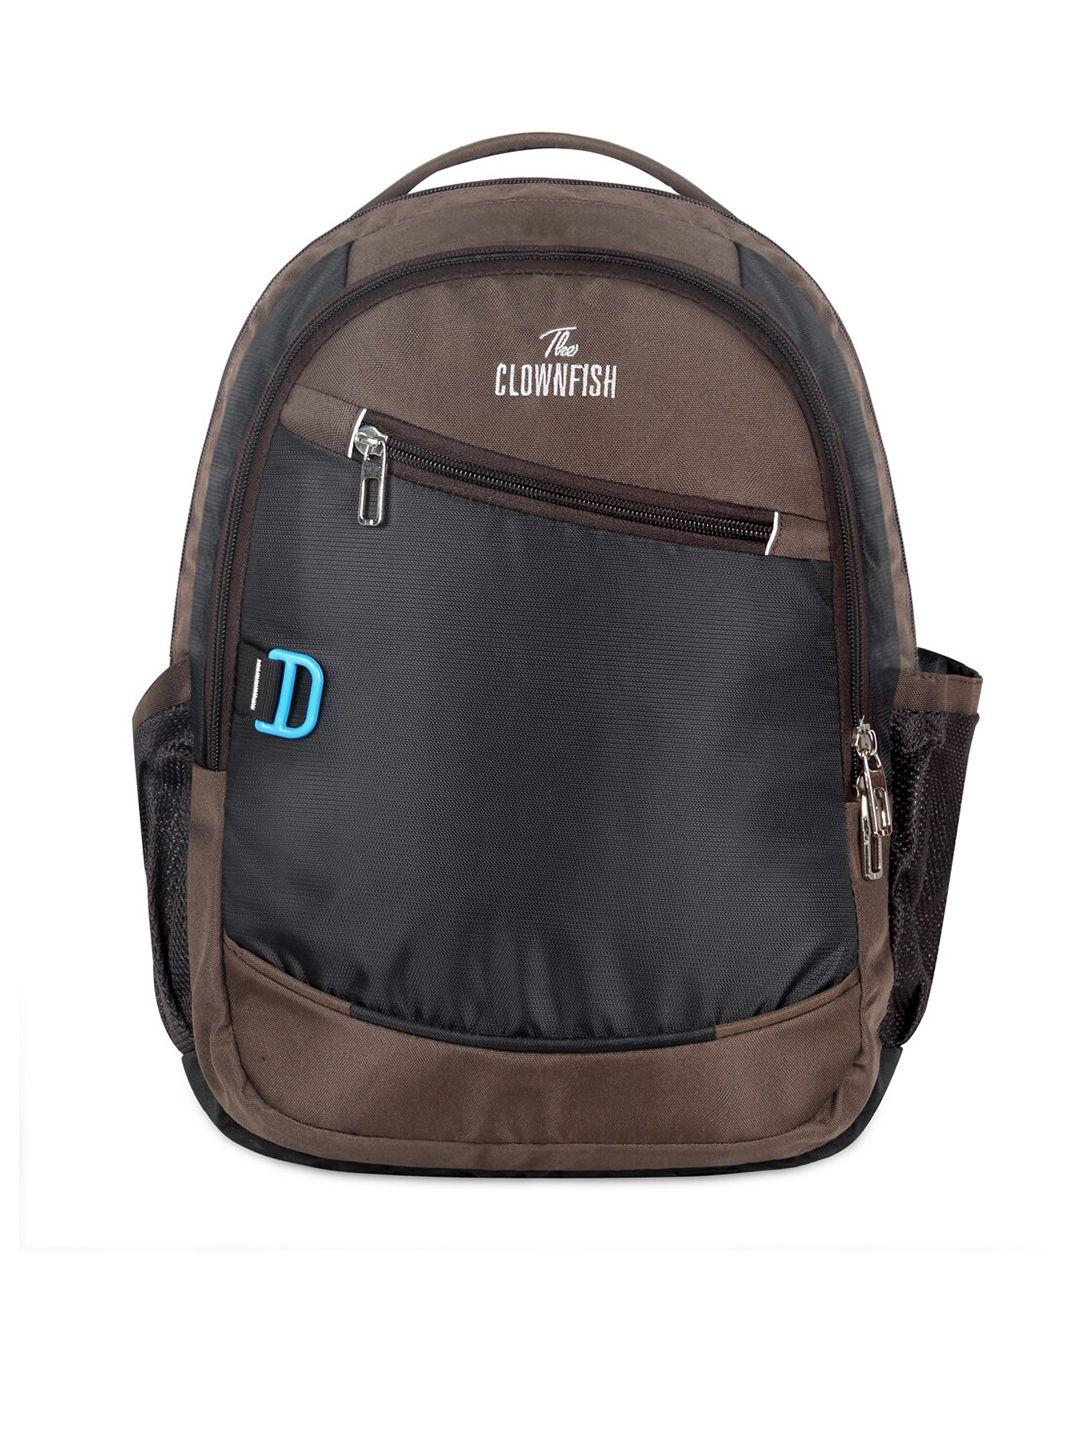 the clownfish unisex brown & black backpack